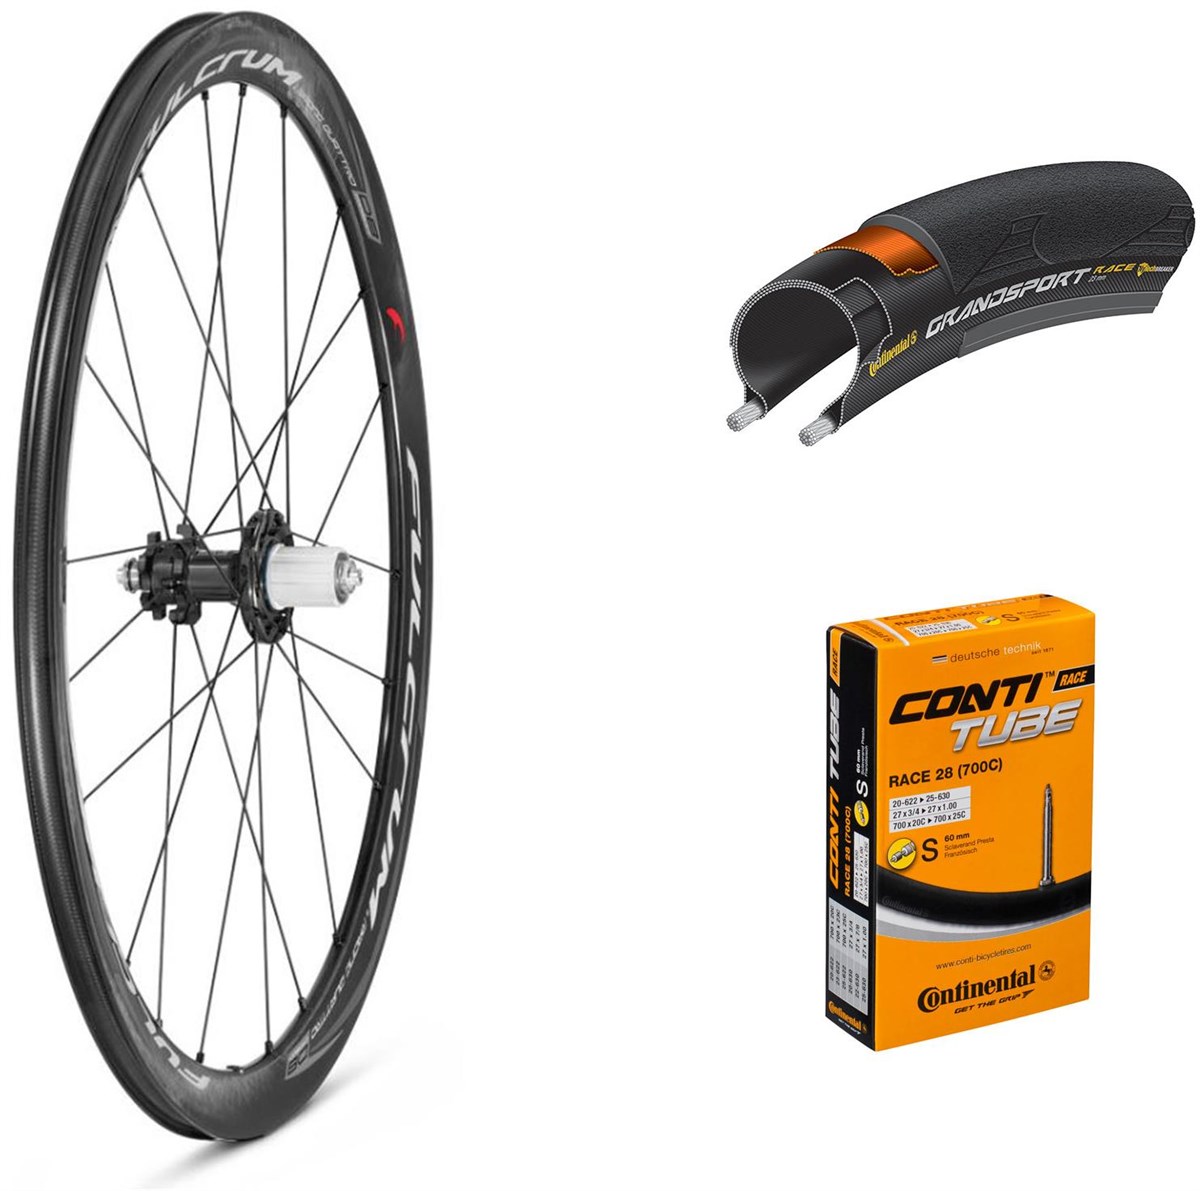 Fulcrum Racing Quattro Carbon Disc 700c Wheelset with Tyres and Tubes product image